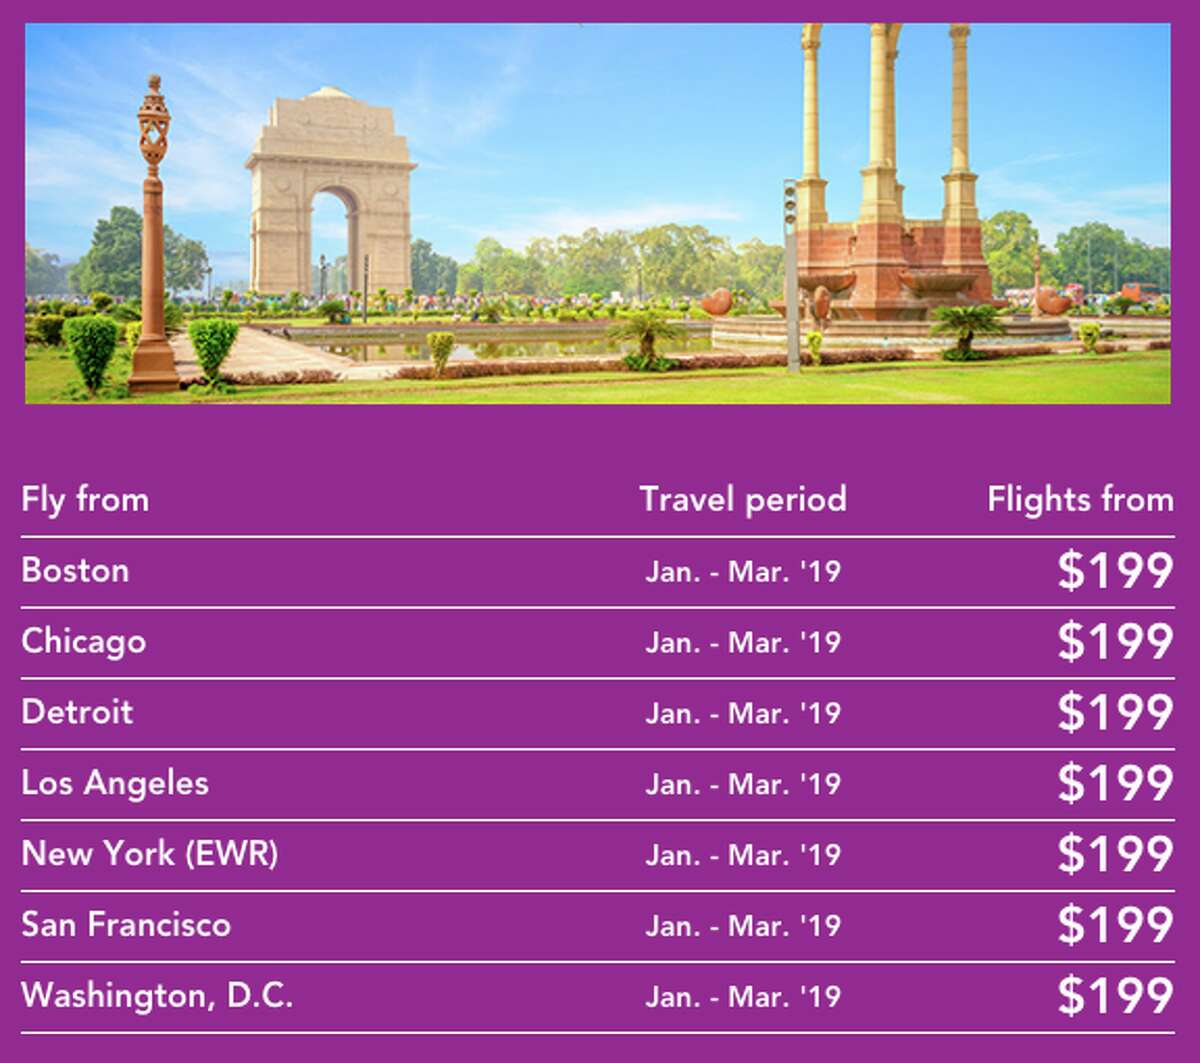 Are those $199 fares to India too good to be true?